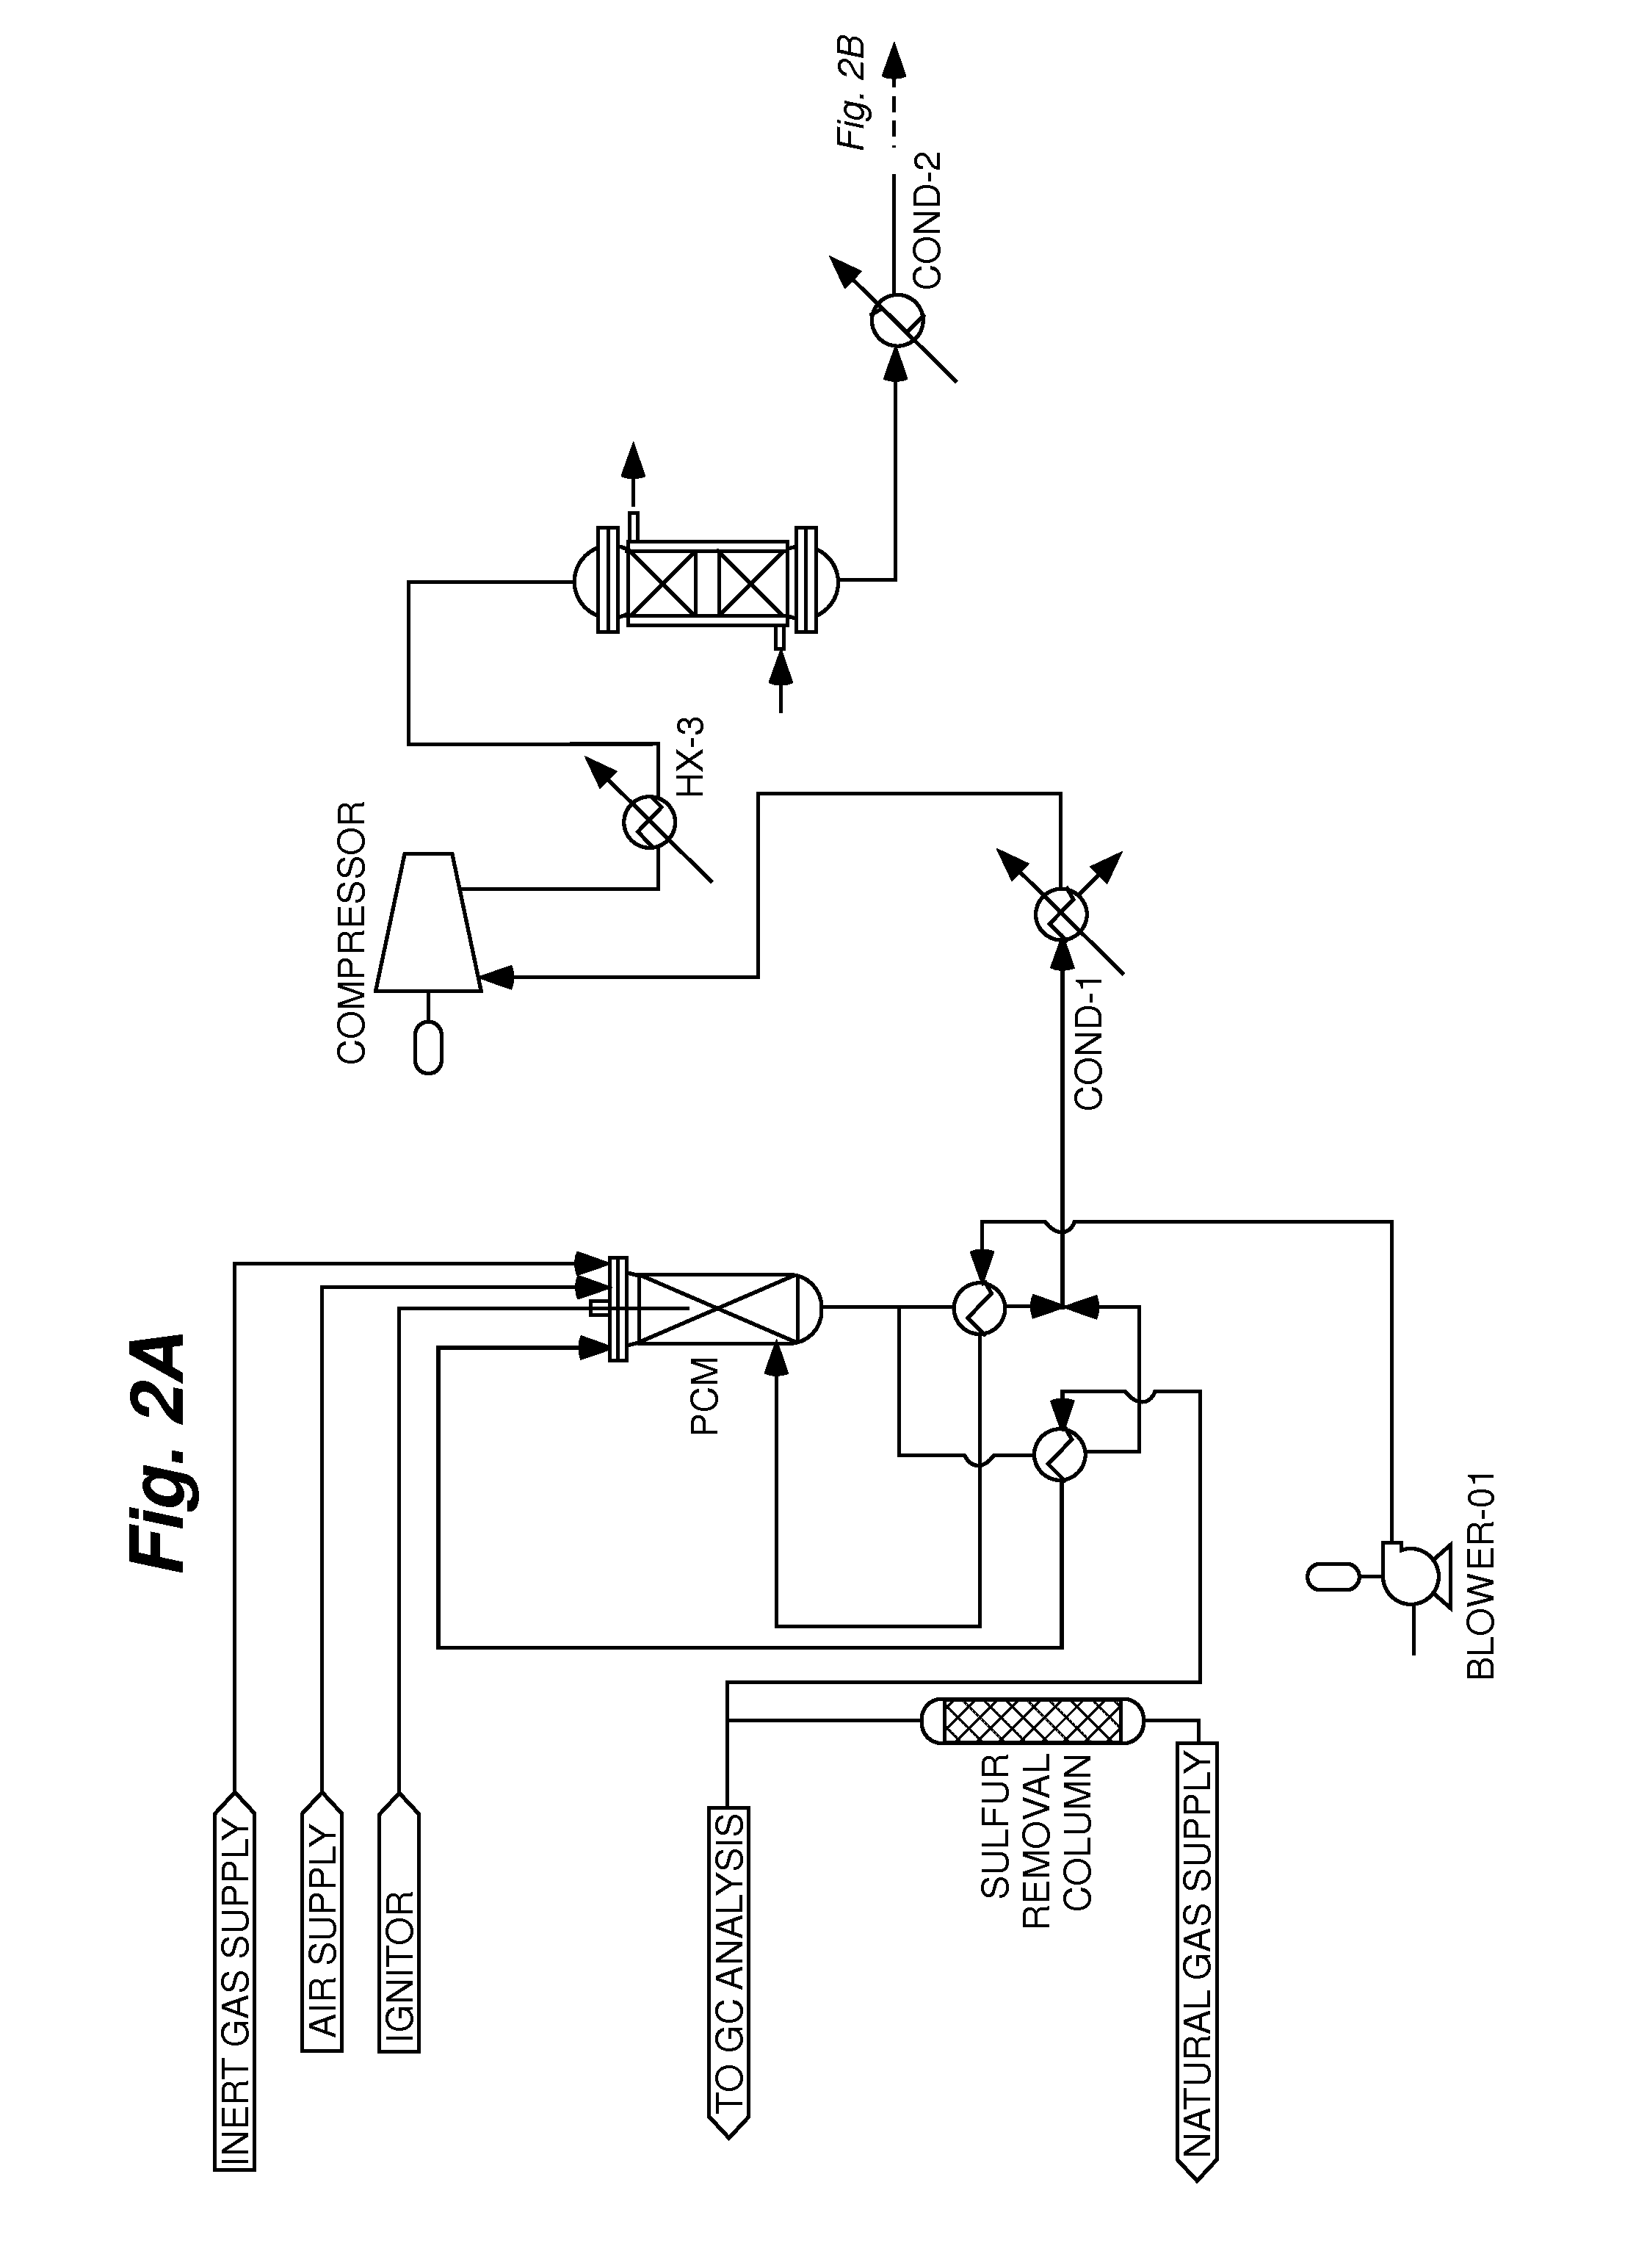 Systems and methods for manufacture of dimethyl ether (DME) from natural gas and flare gas feedstock